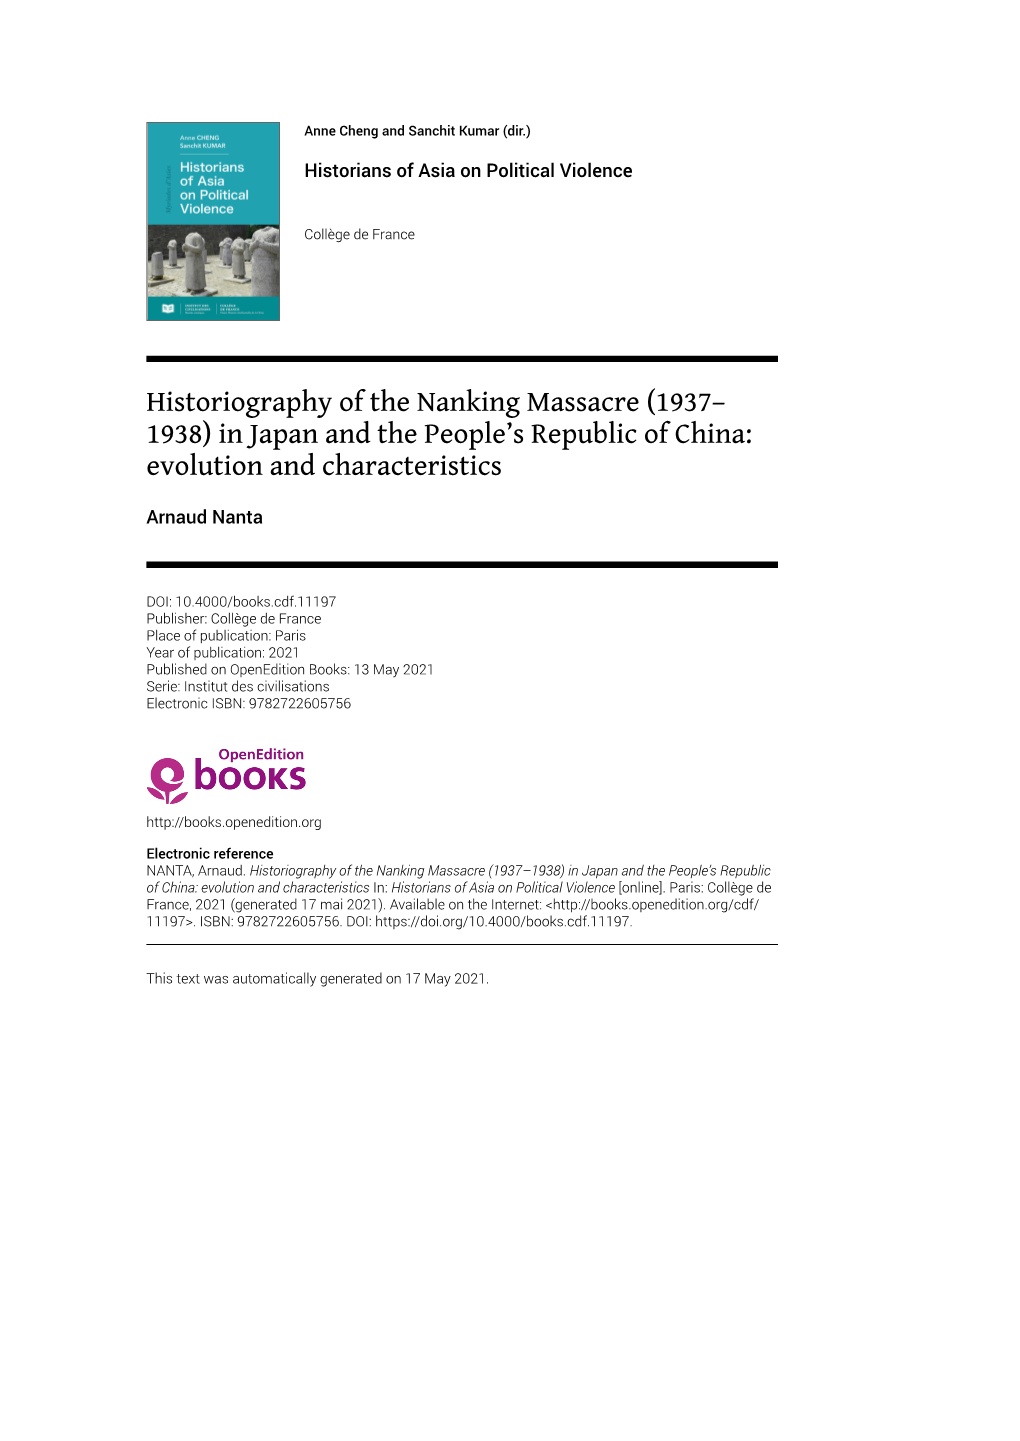 Historiography of the Nanking Massacre (1937– 1938) in Japan and the People’S Republic of China: Evolution and Characteristics